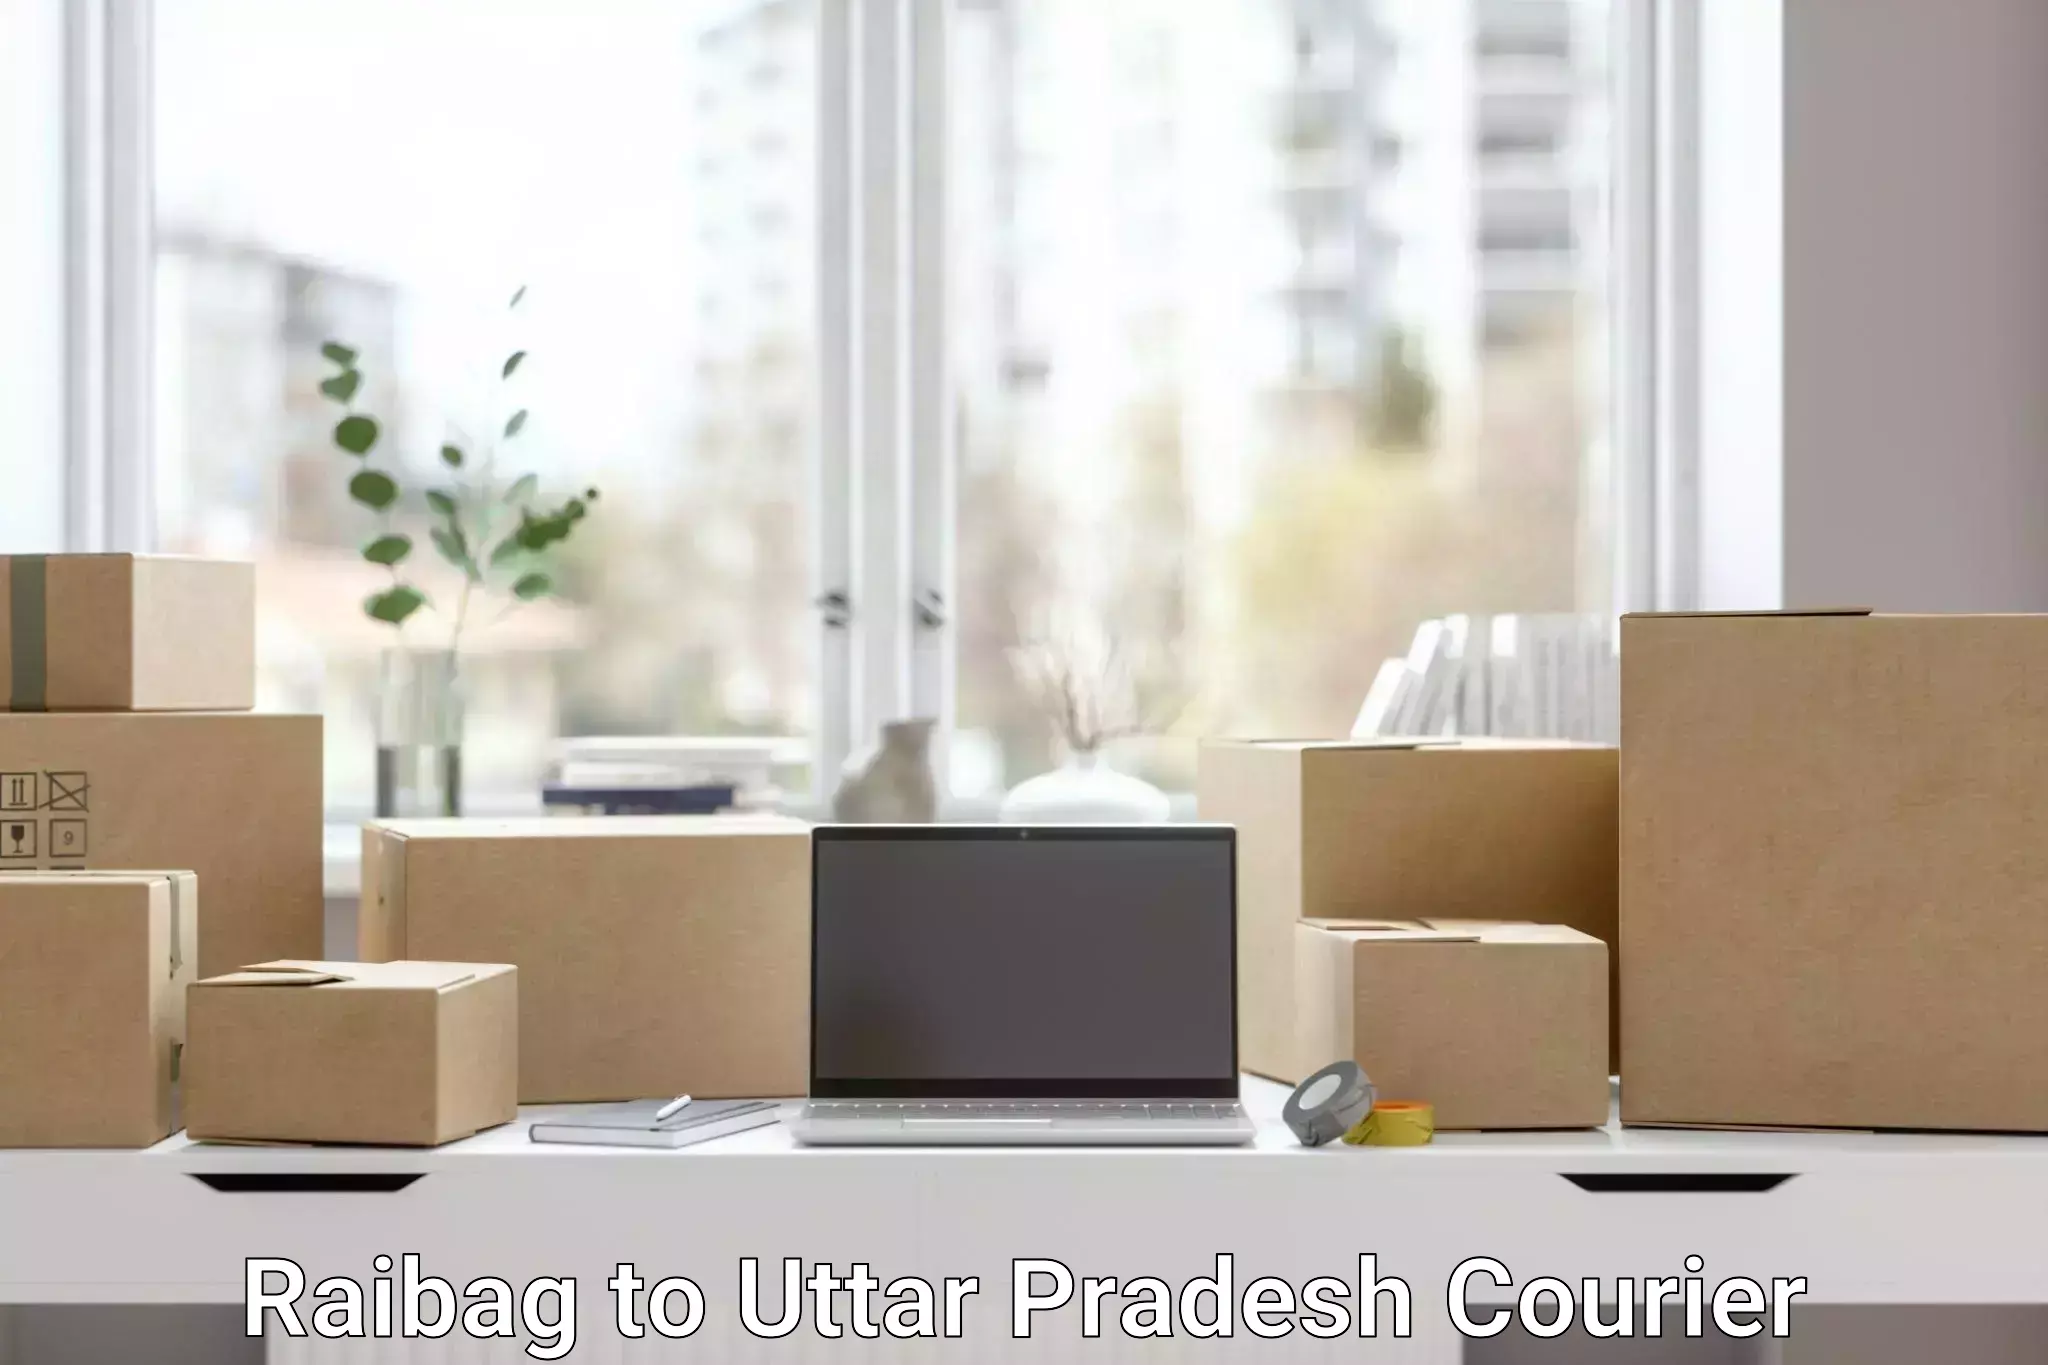 Full-service courier options Raibag to Rajesultanpur